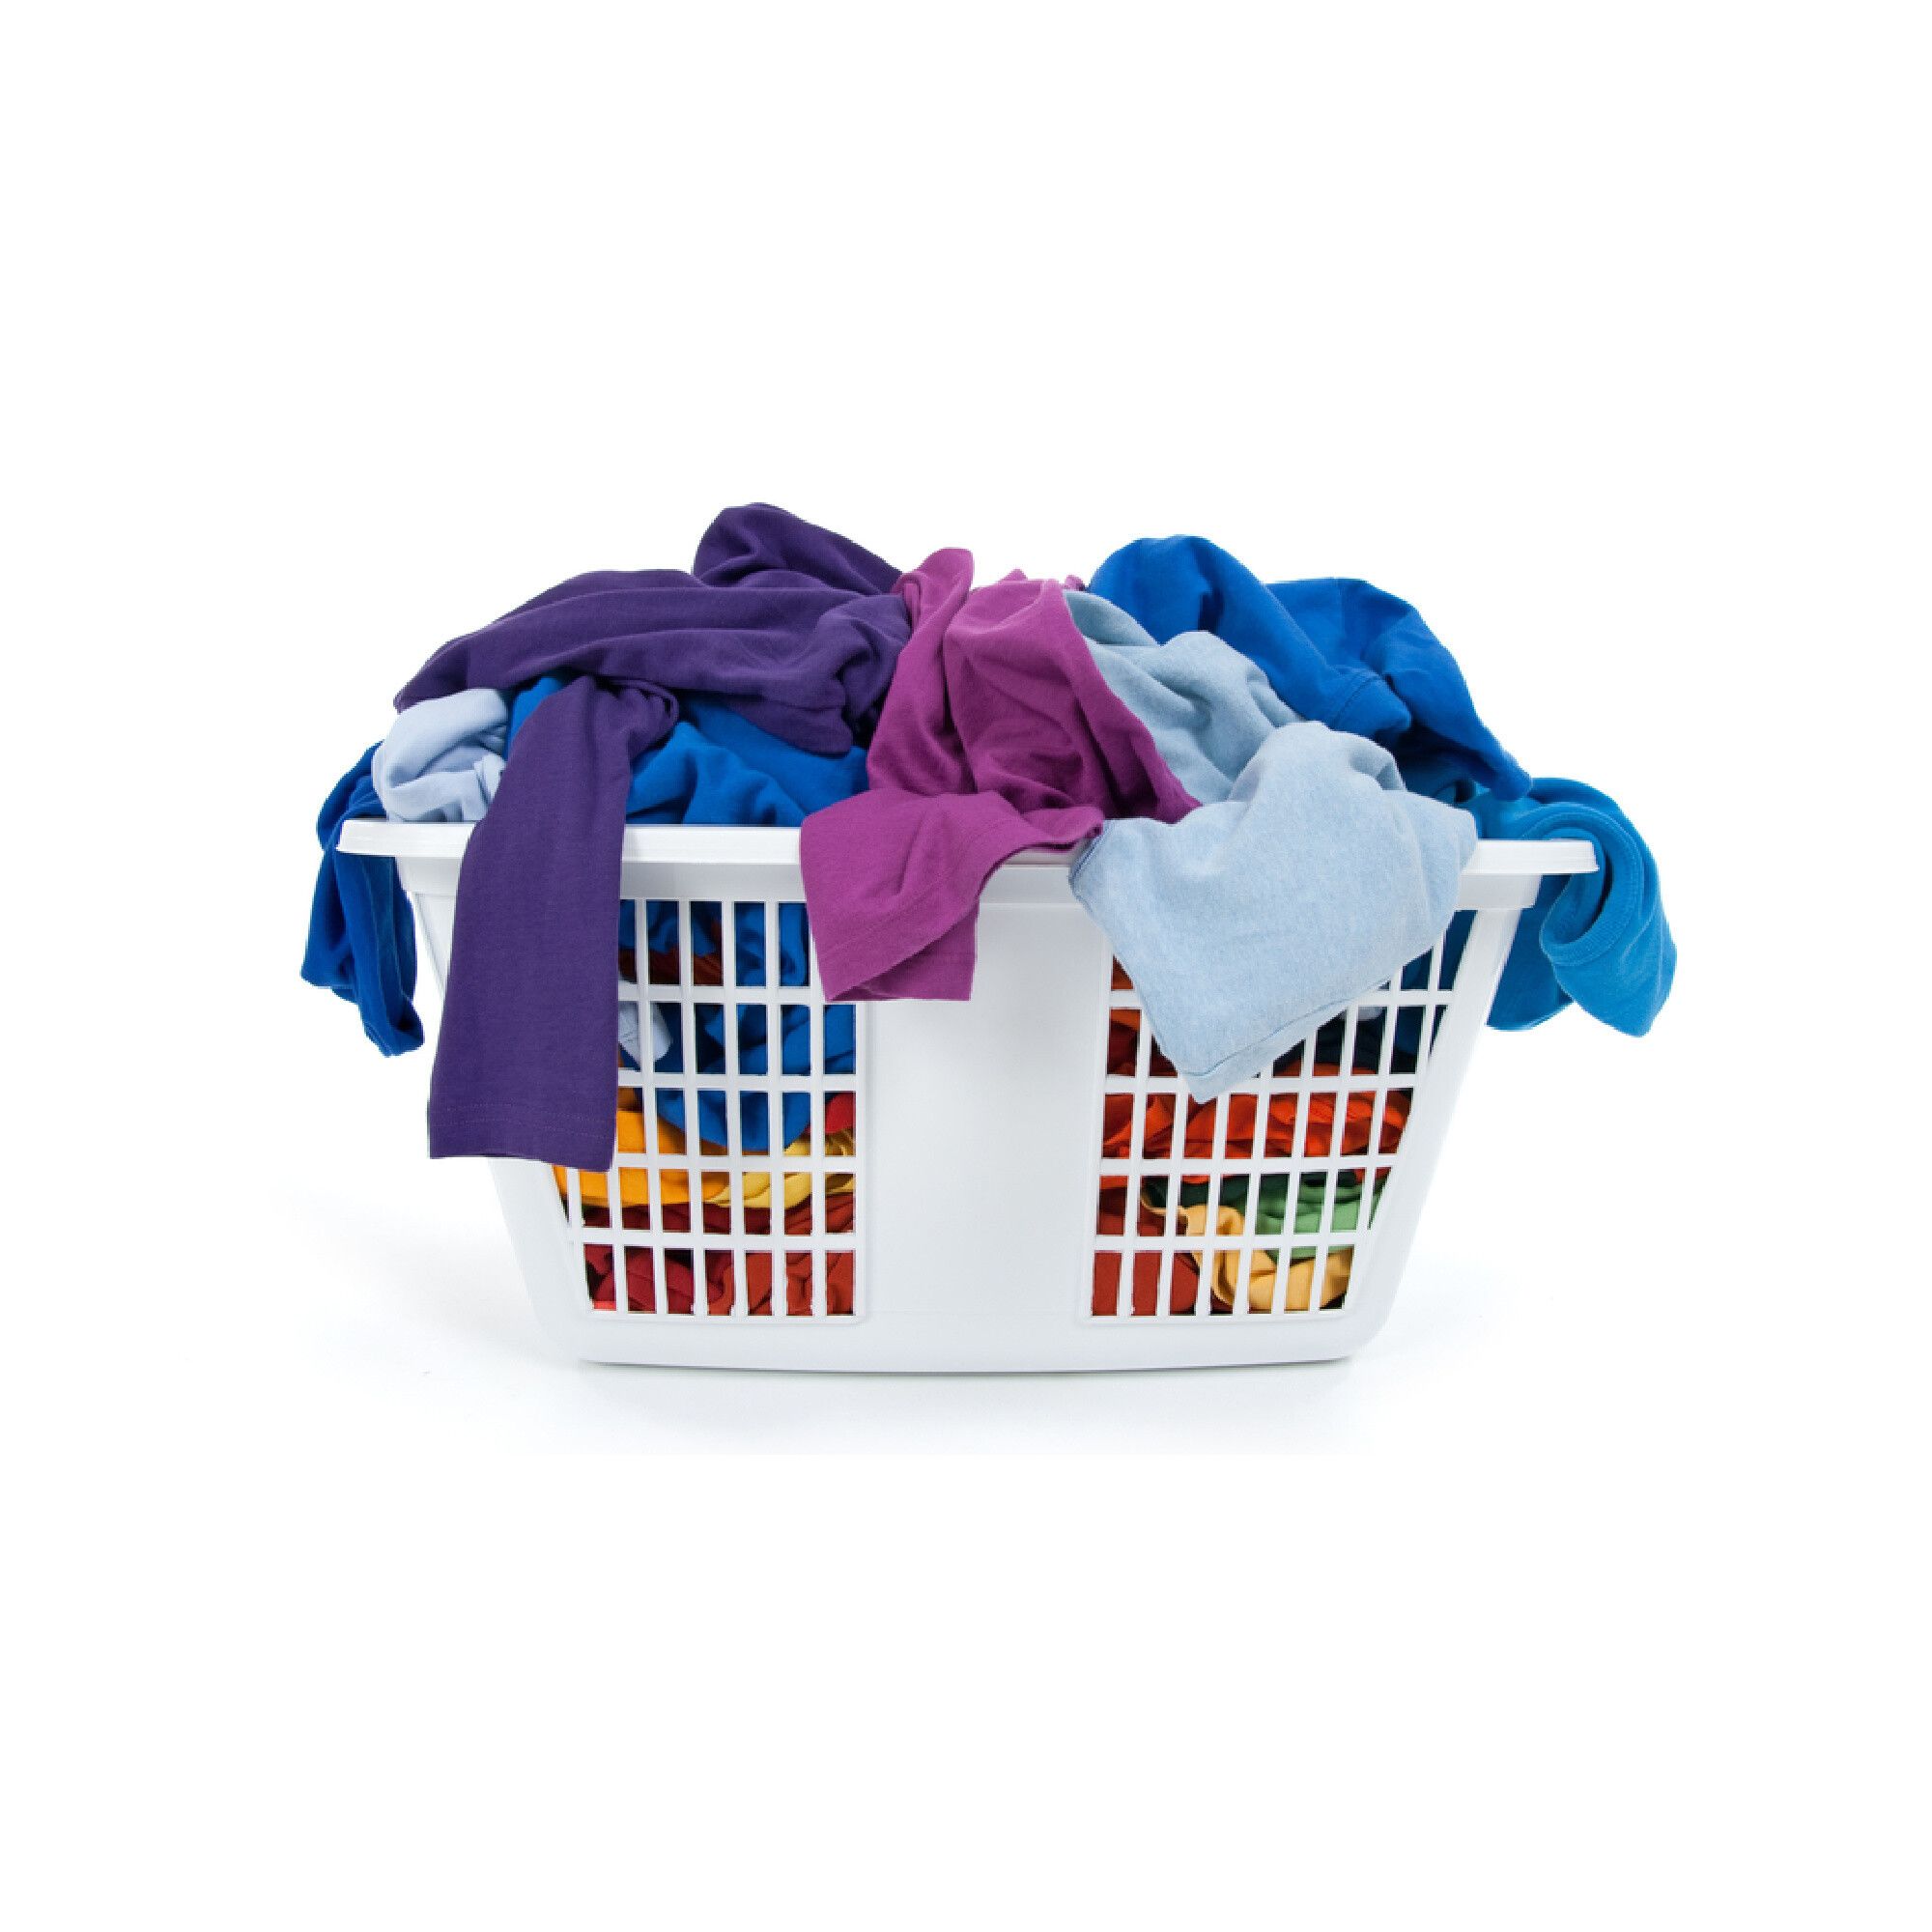 2. Wash, Dry and Fold Load of Washing